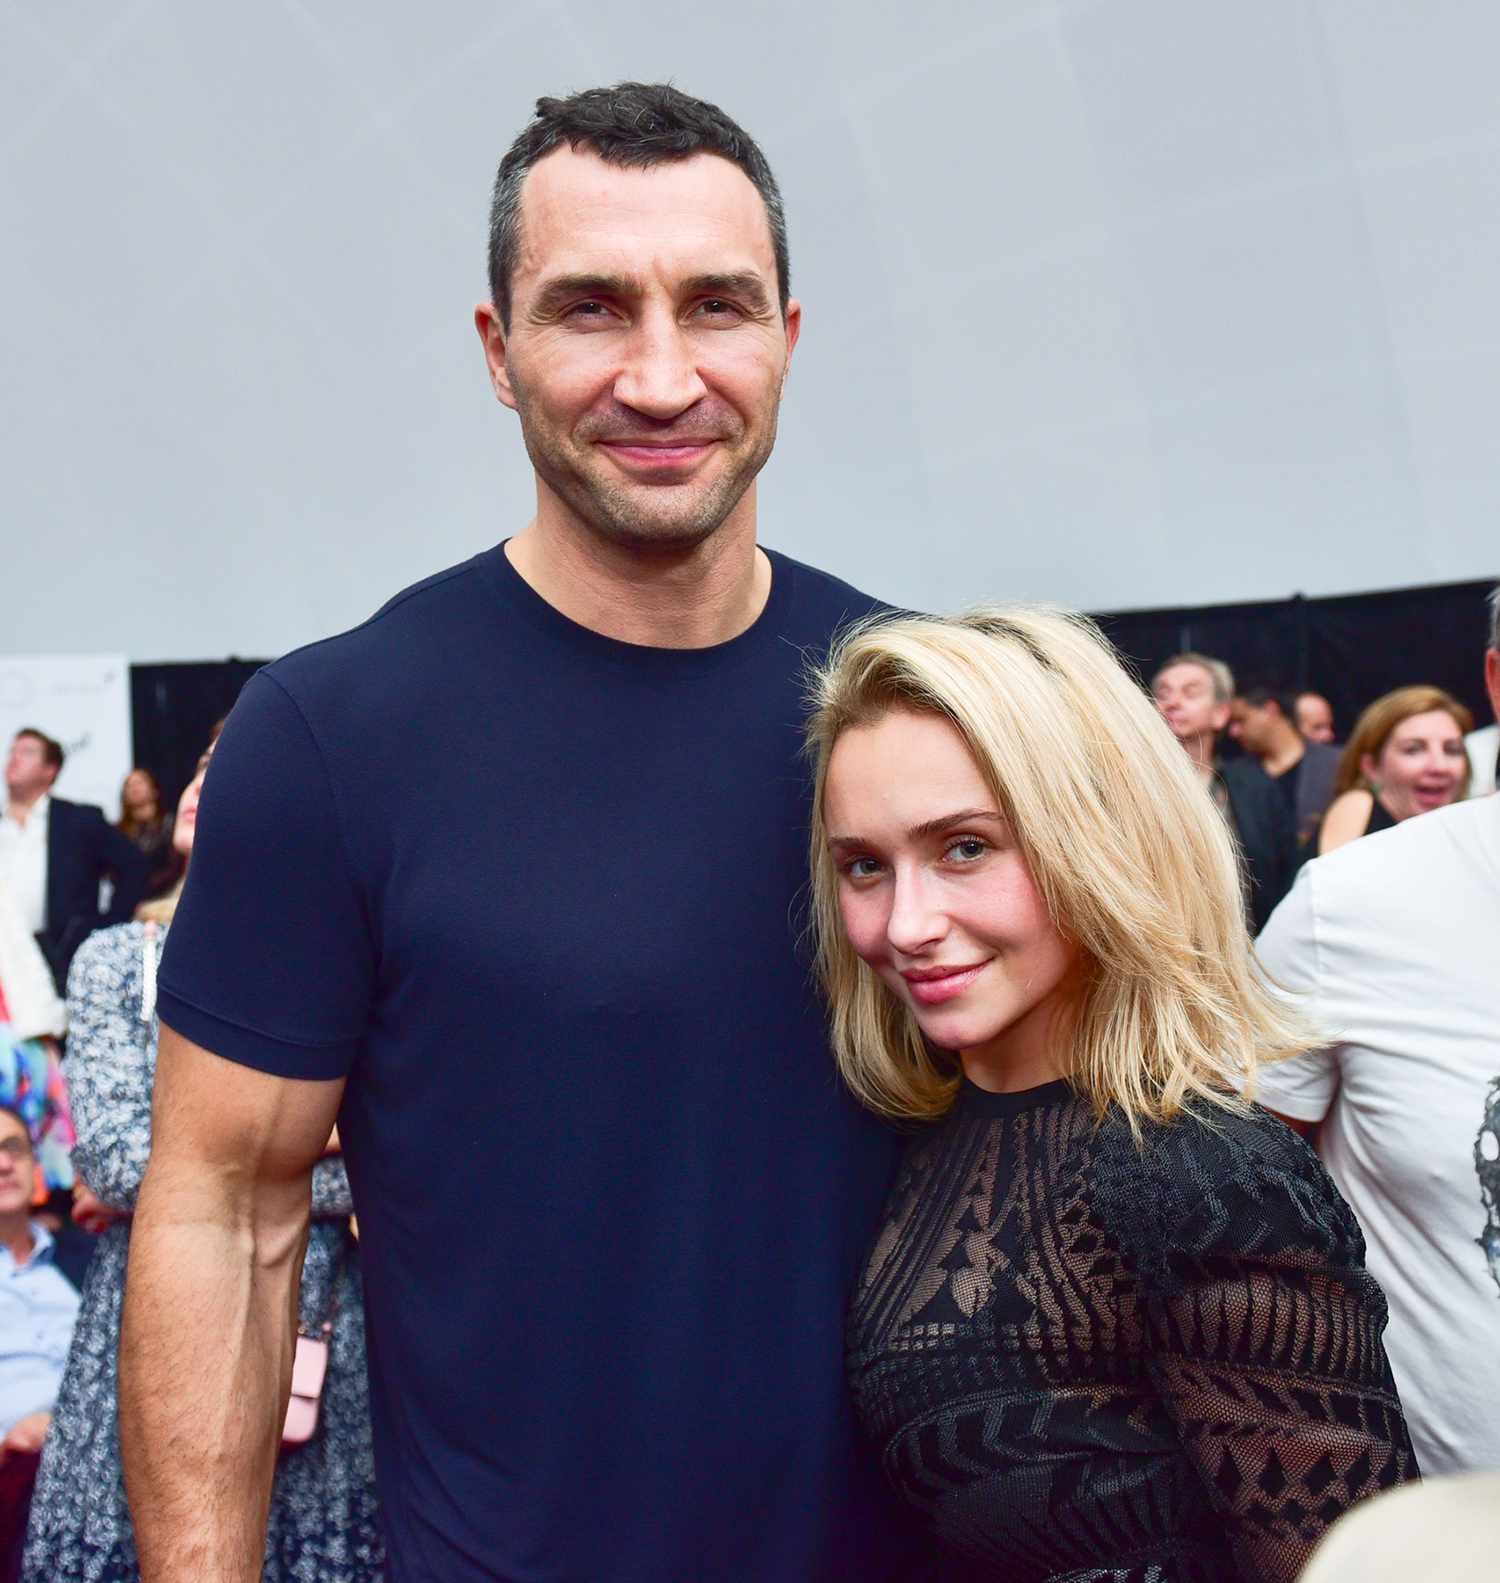 Wladimir Klitschko and Hayden Panettiere attend The Daily Front Row and Faena Art Celebrate the Launch of The Daily's Miami Edition, Featuring Act One at The Faena Art Dome on November 29, 2016 in Miami Beach, FL